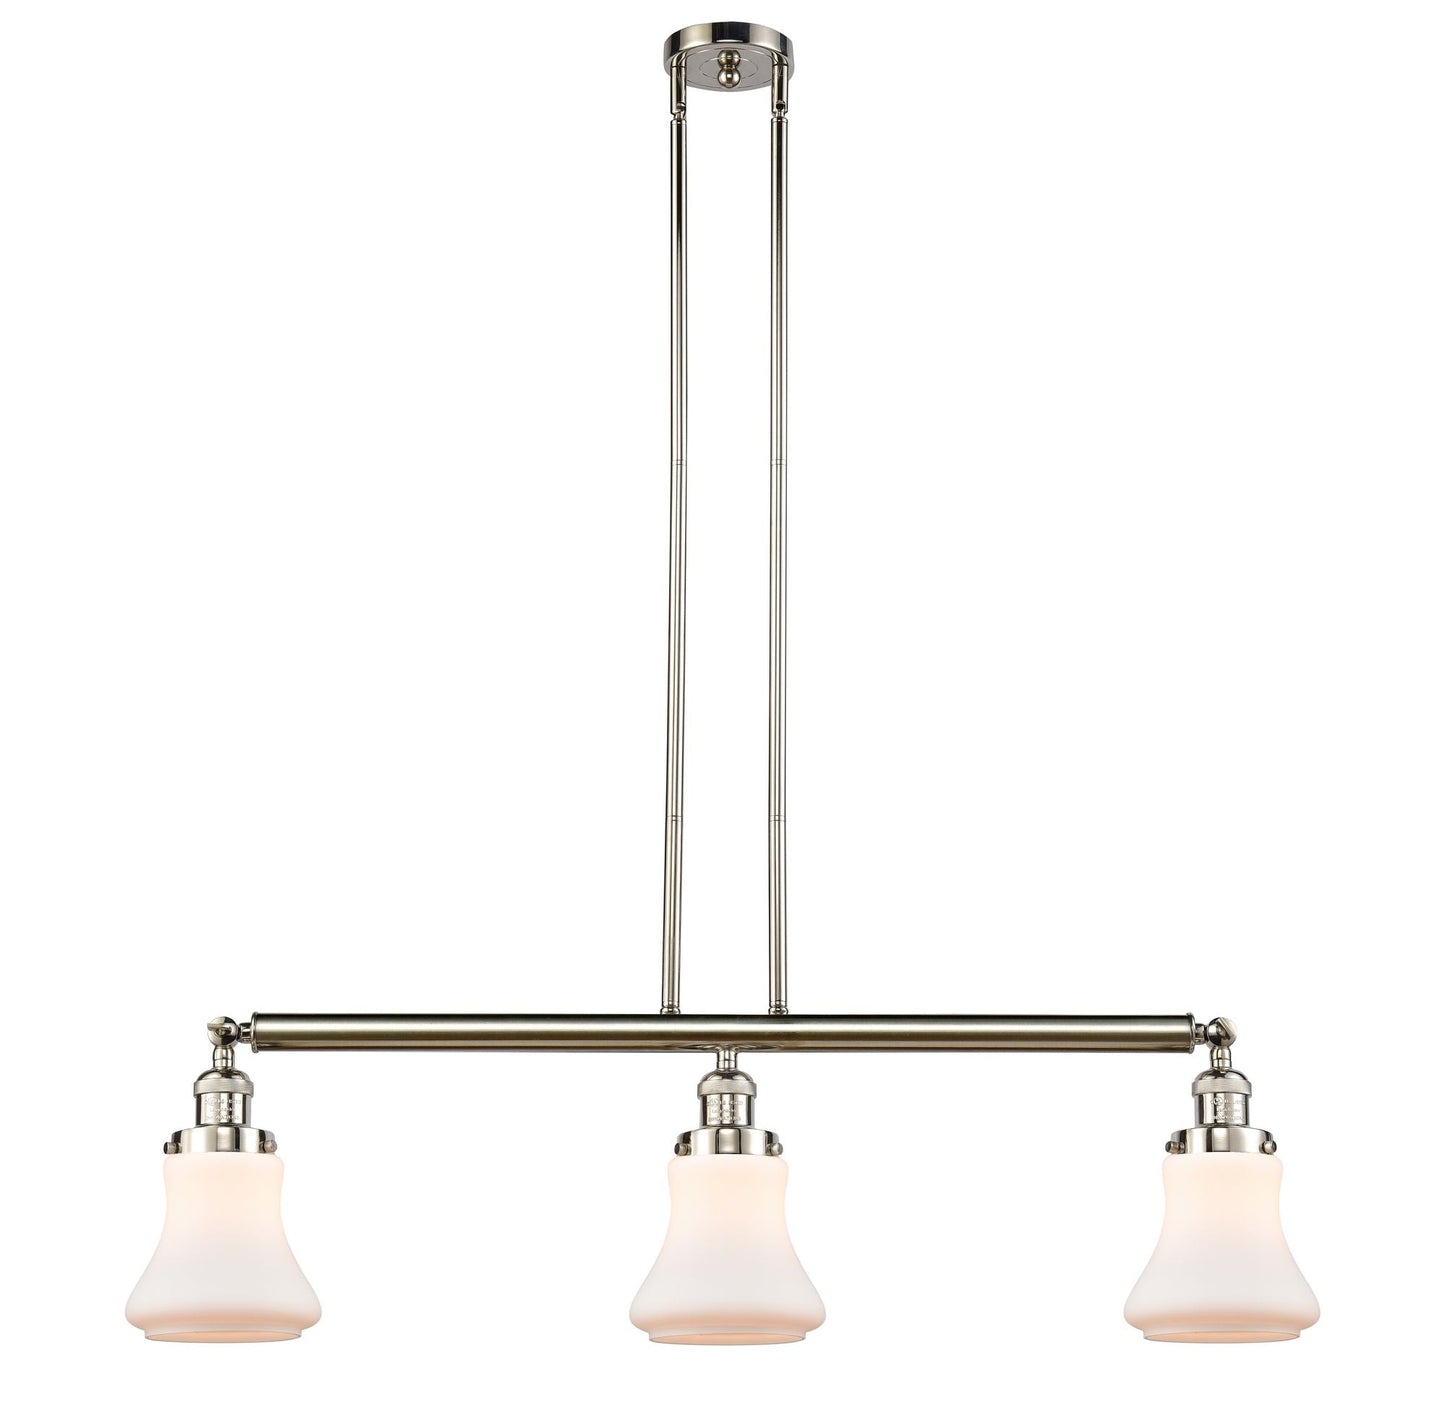 213-PN-G191 3-Light 38.75" Polished Nickel Island Light - Matte White Bellmont Glass - LED Bulb - Dimmensions: 38.75 x 6.25 x 11<br>Minimum Height : 20.5<br>Maximum Height : 44.5 - Sloped Ceiling Compatible: Yes